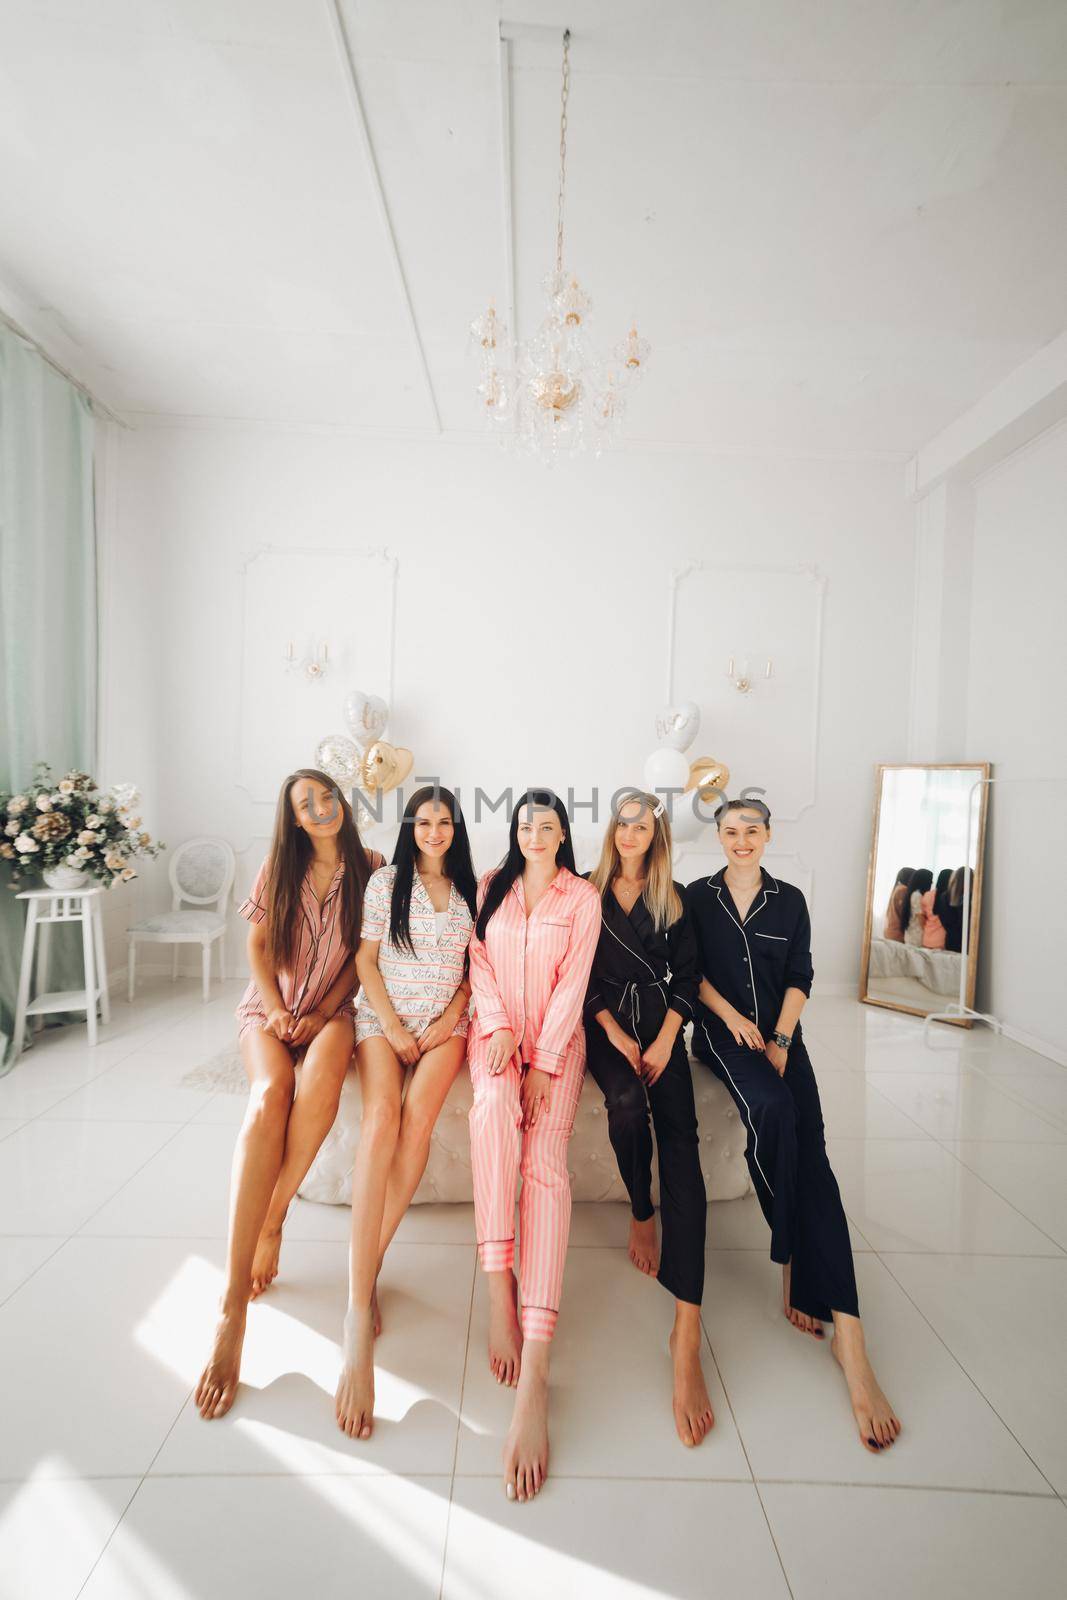 Smiling beautiful women in sleepwear spending time together during home party. Birthday party concept